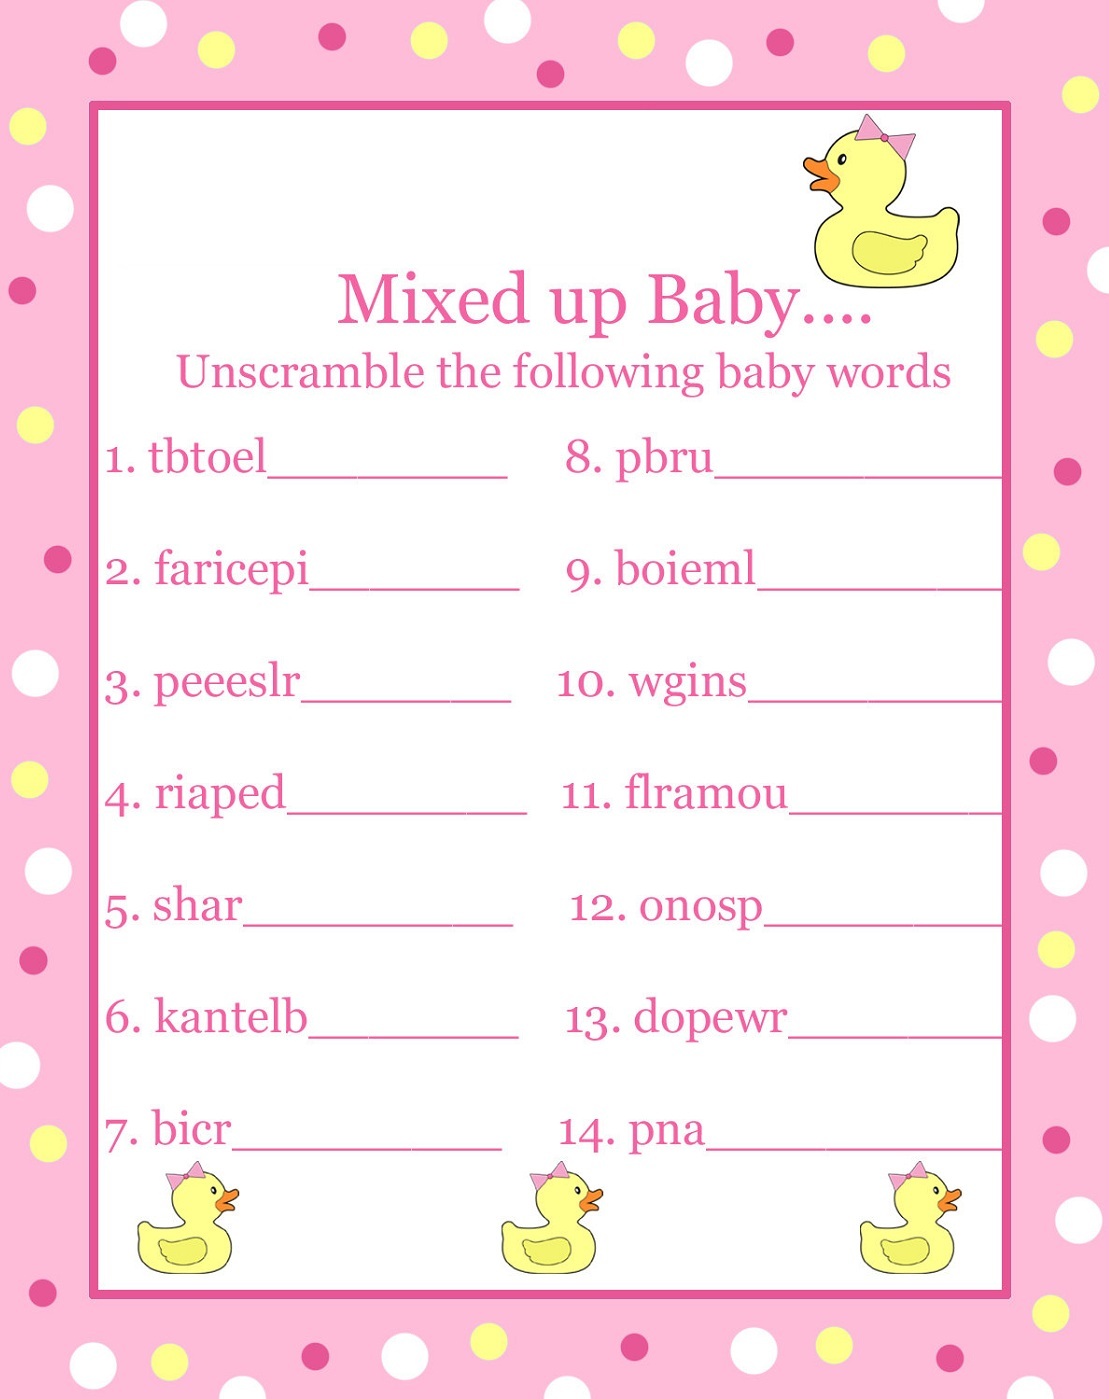 nerdy-free-printable-baby-shower-games-with-answers-russell-website